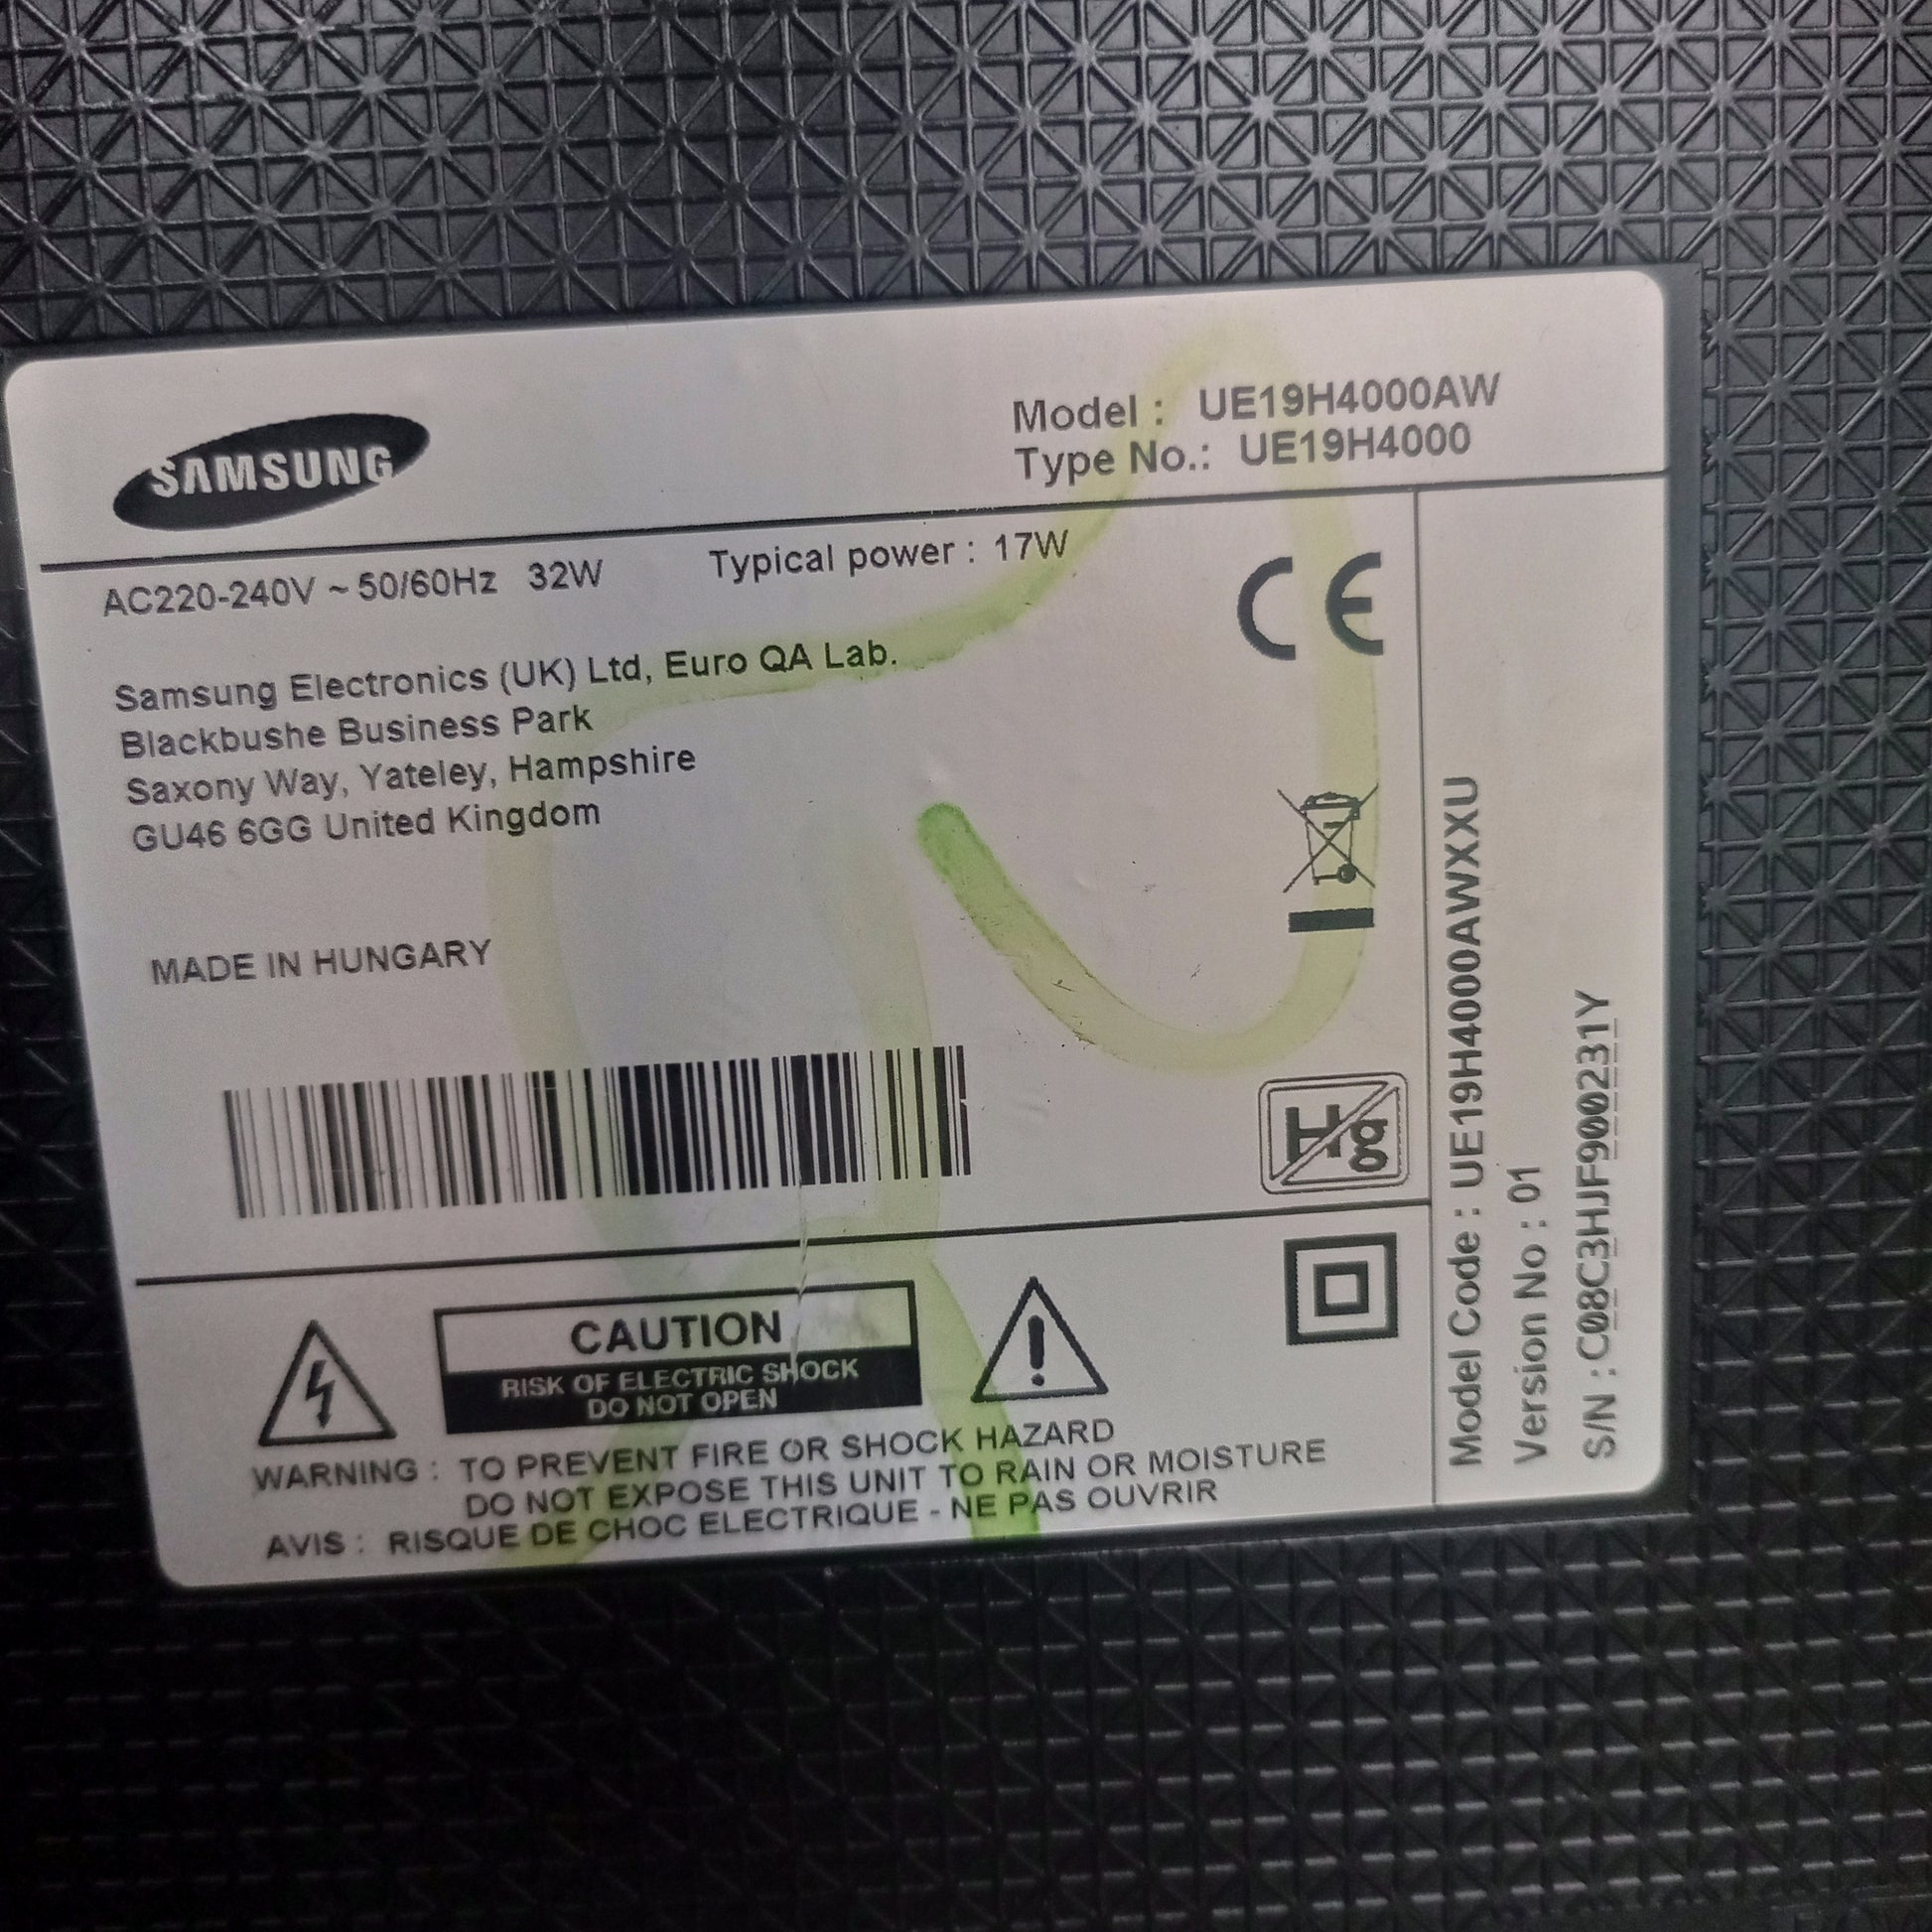 SAMSUNG 19 Inch UE19H4000AW HD Ready LED TV - Model number sticker